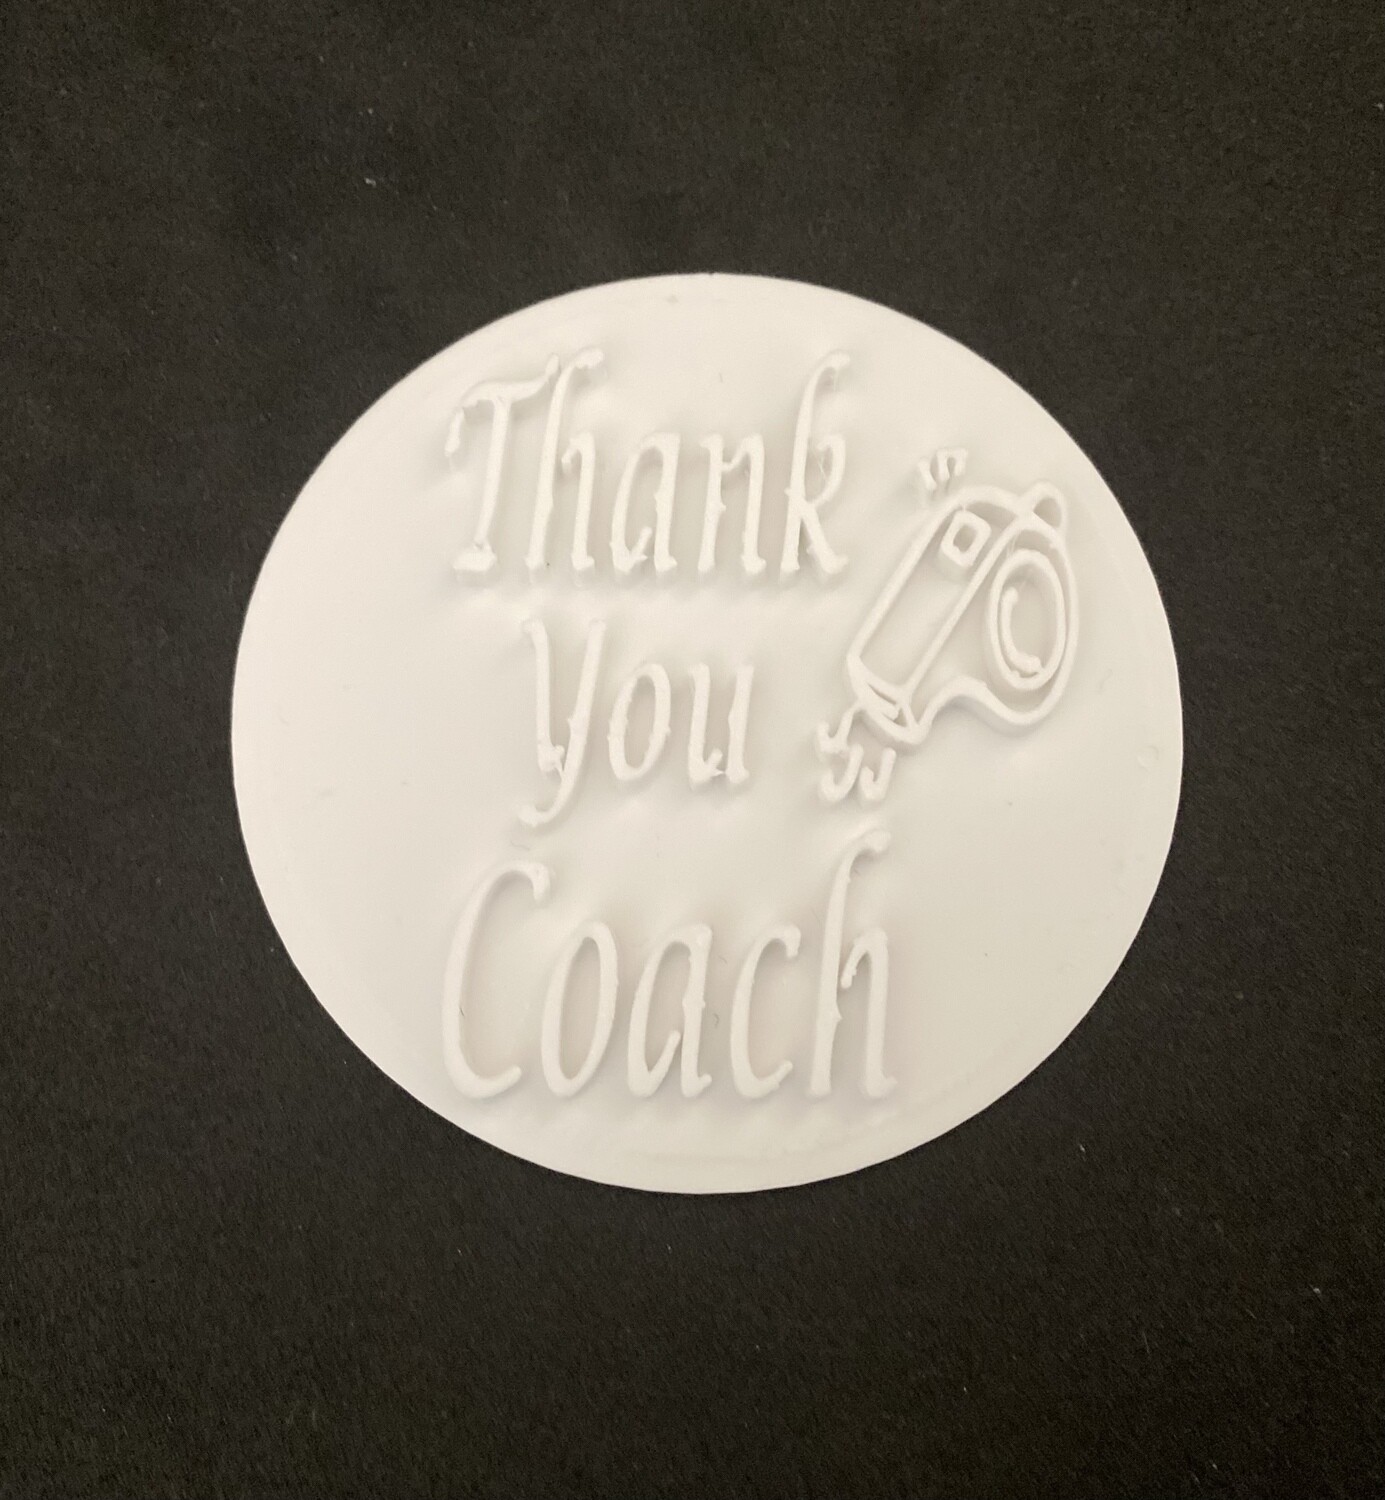 Thank you Coach - stamp